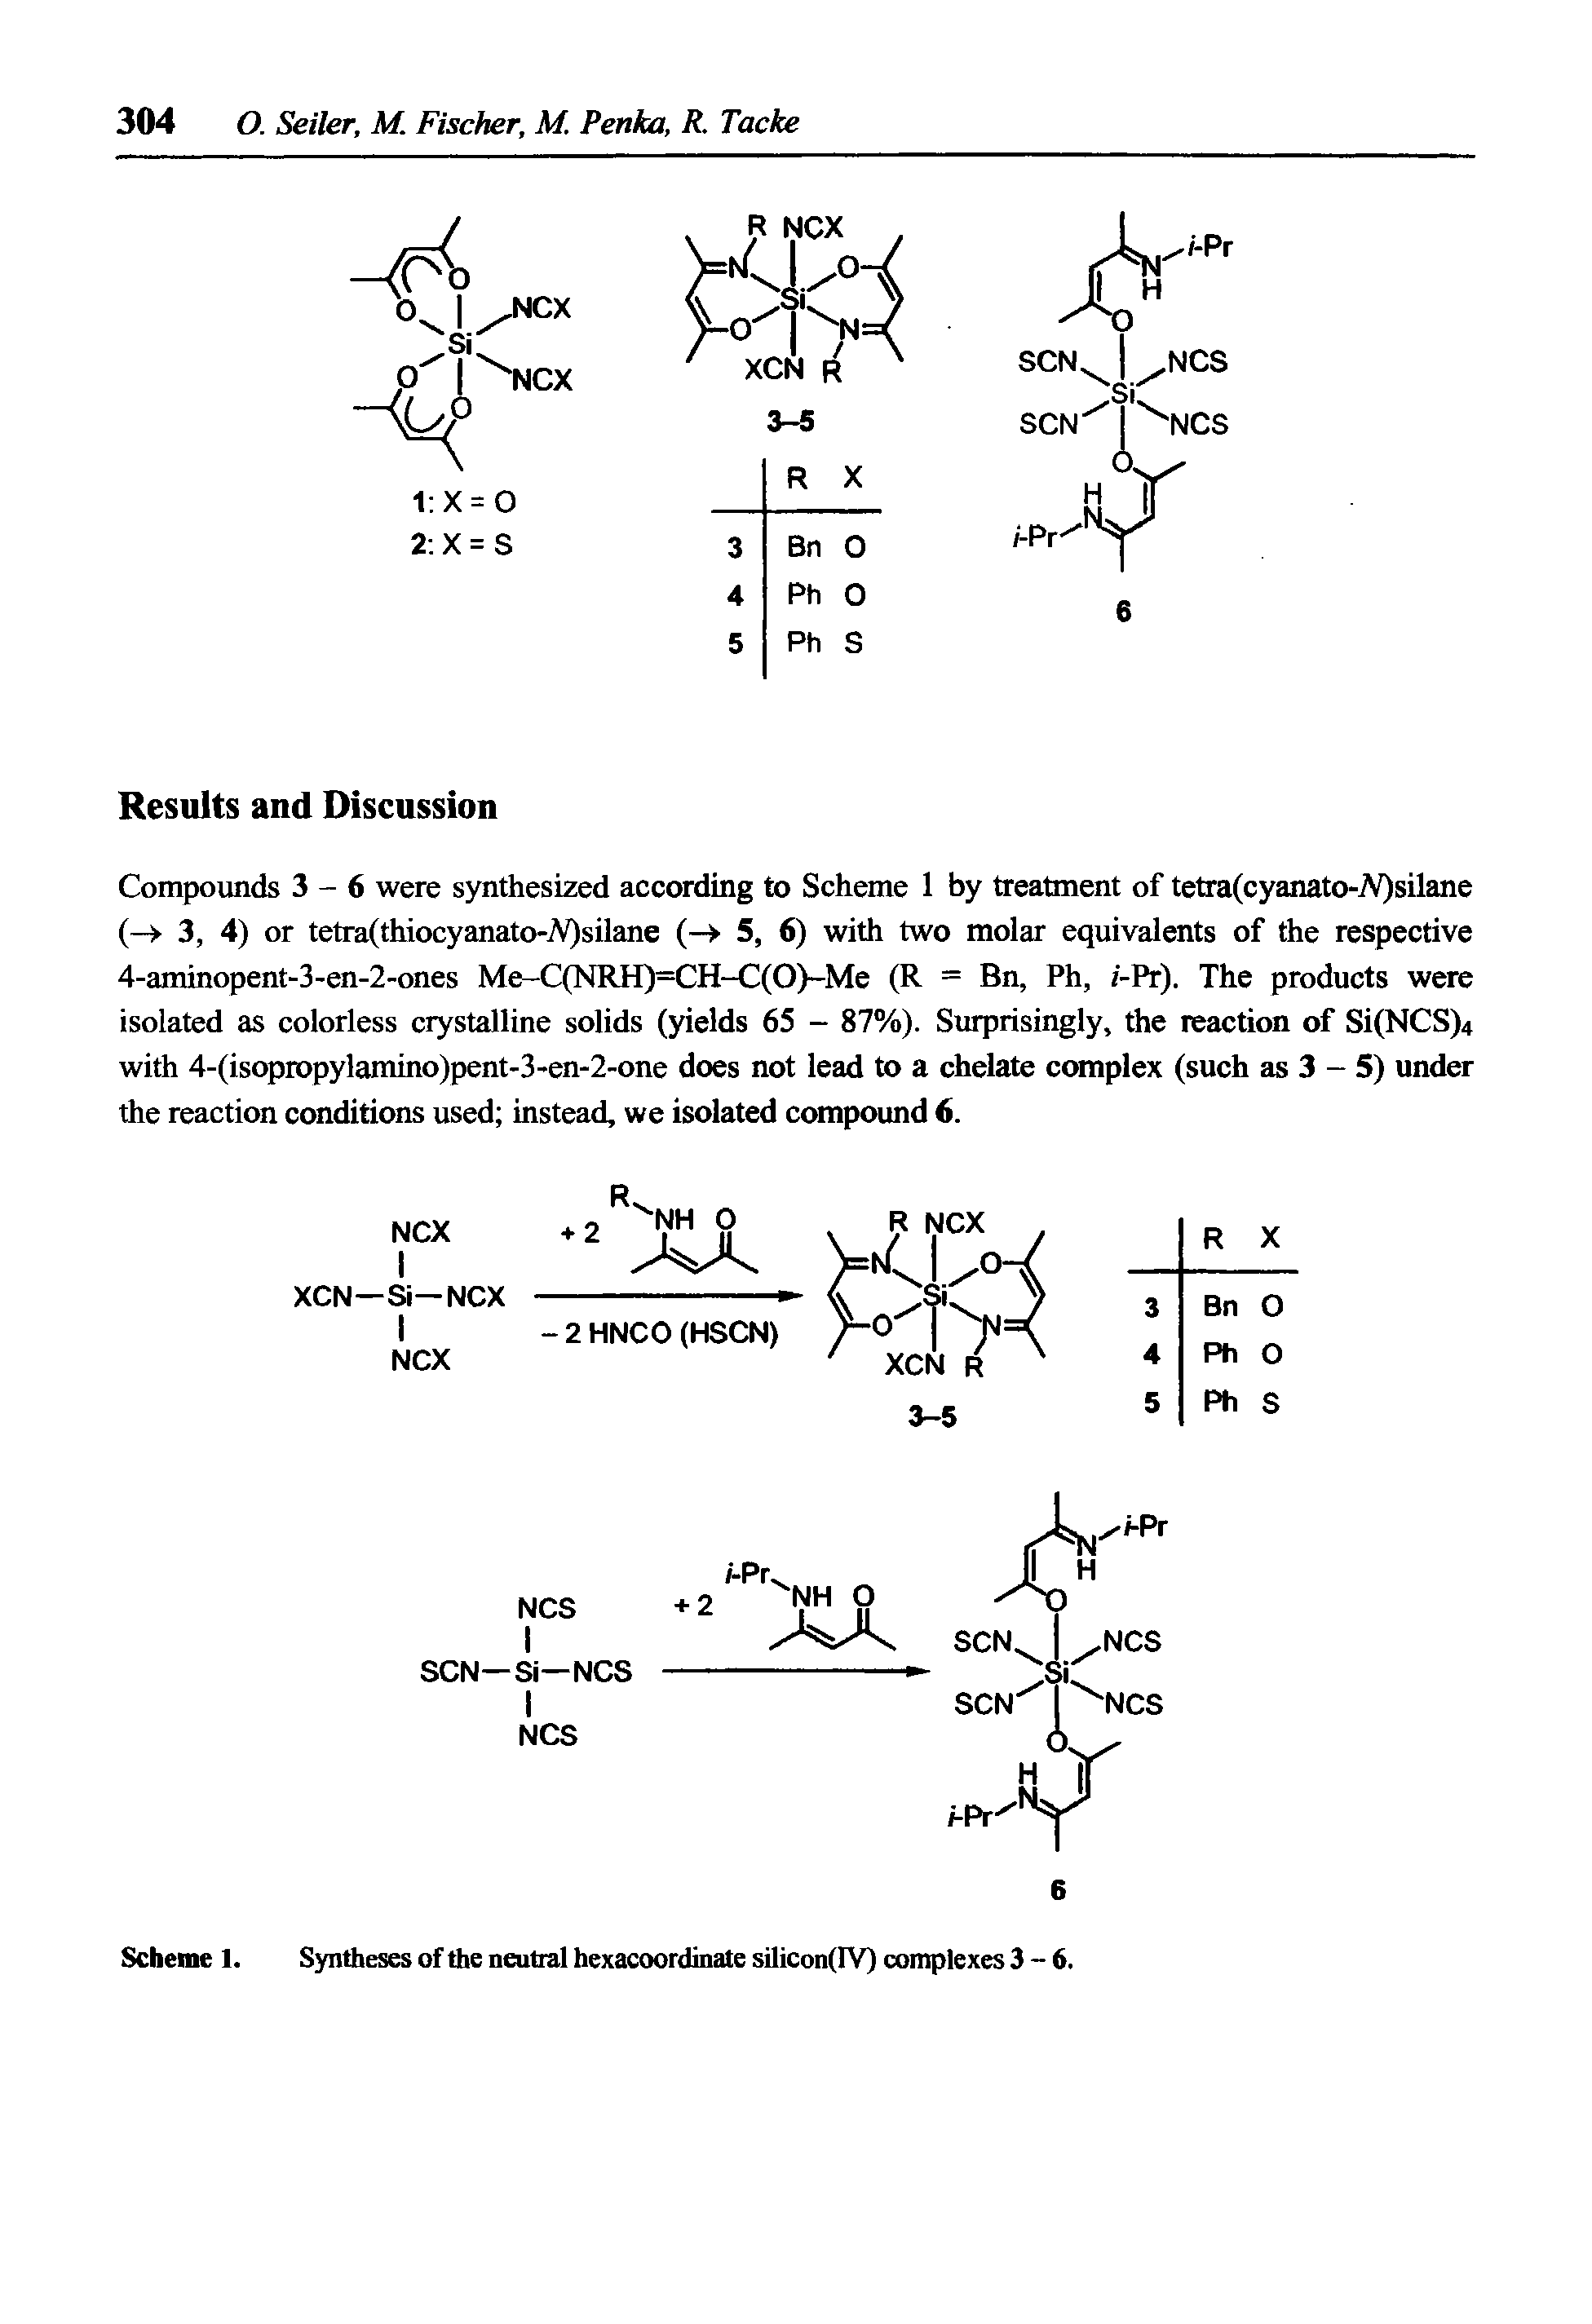 Scheme 1. Syntheses of the neutral hexacoordinate silicon(IV) complexes 3-6.